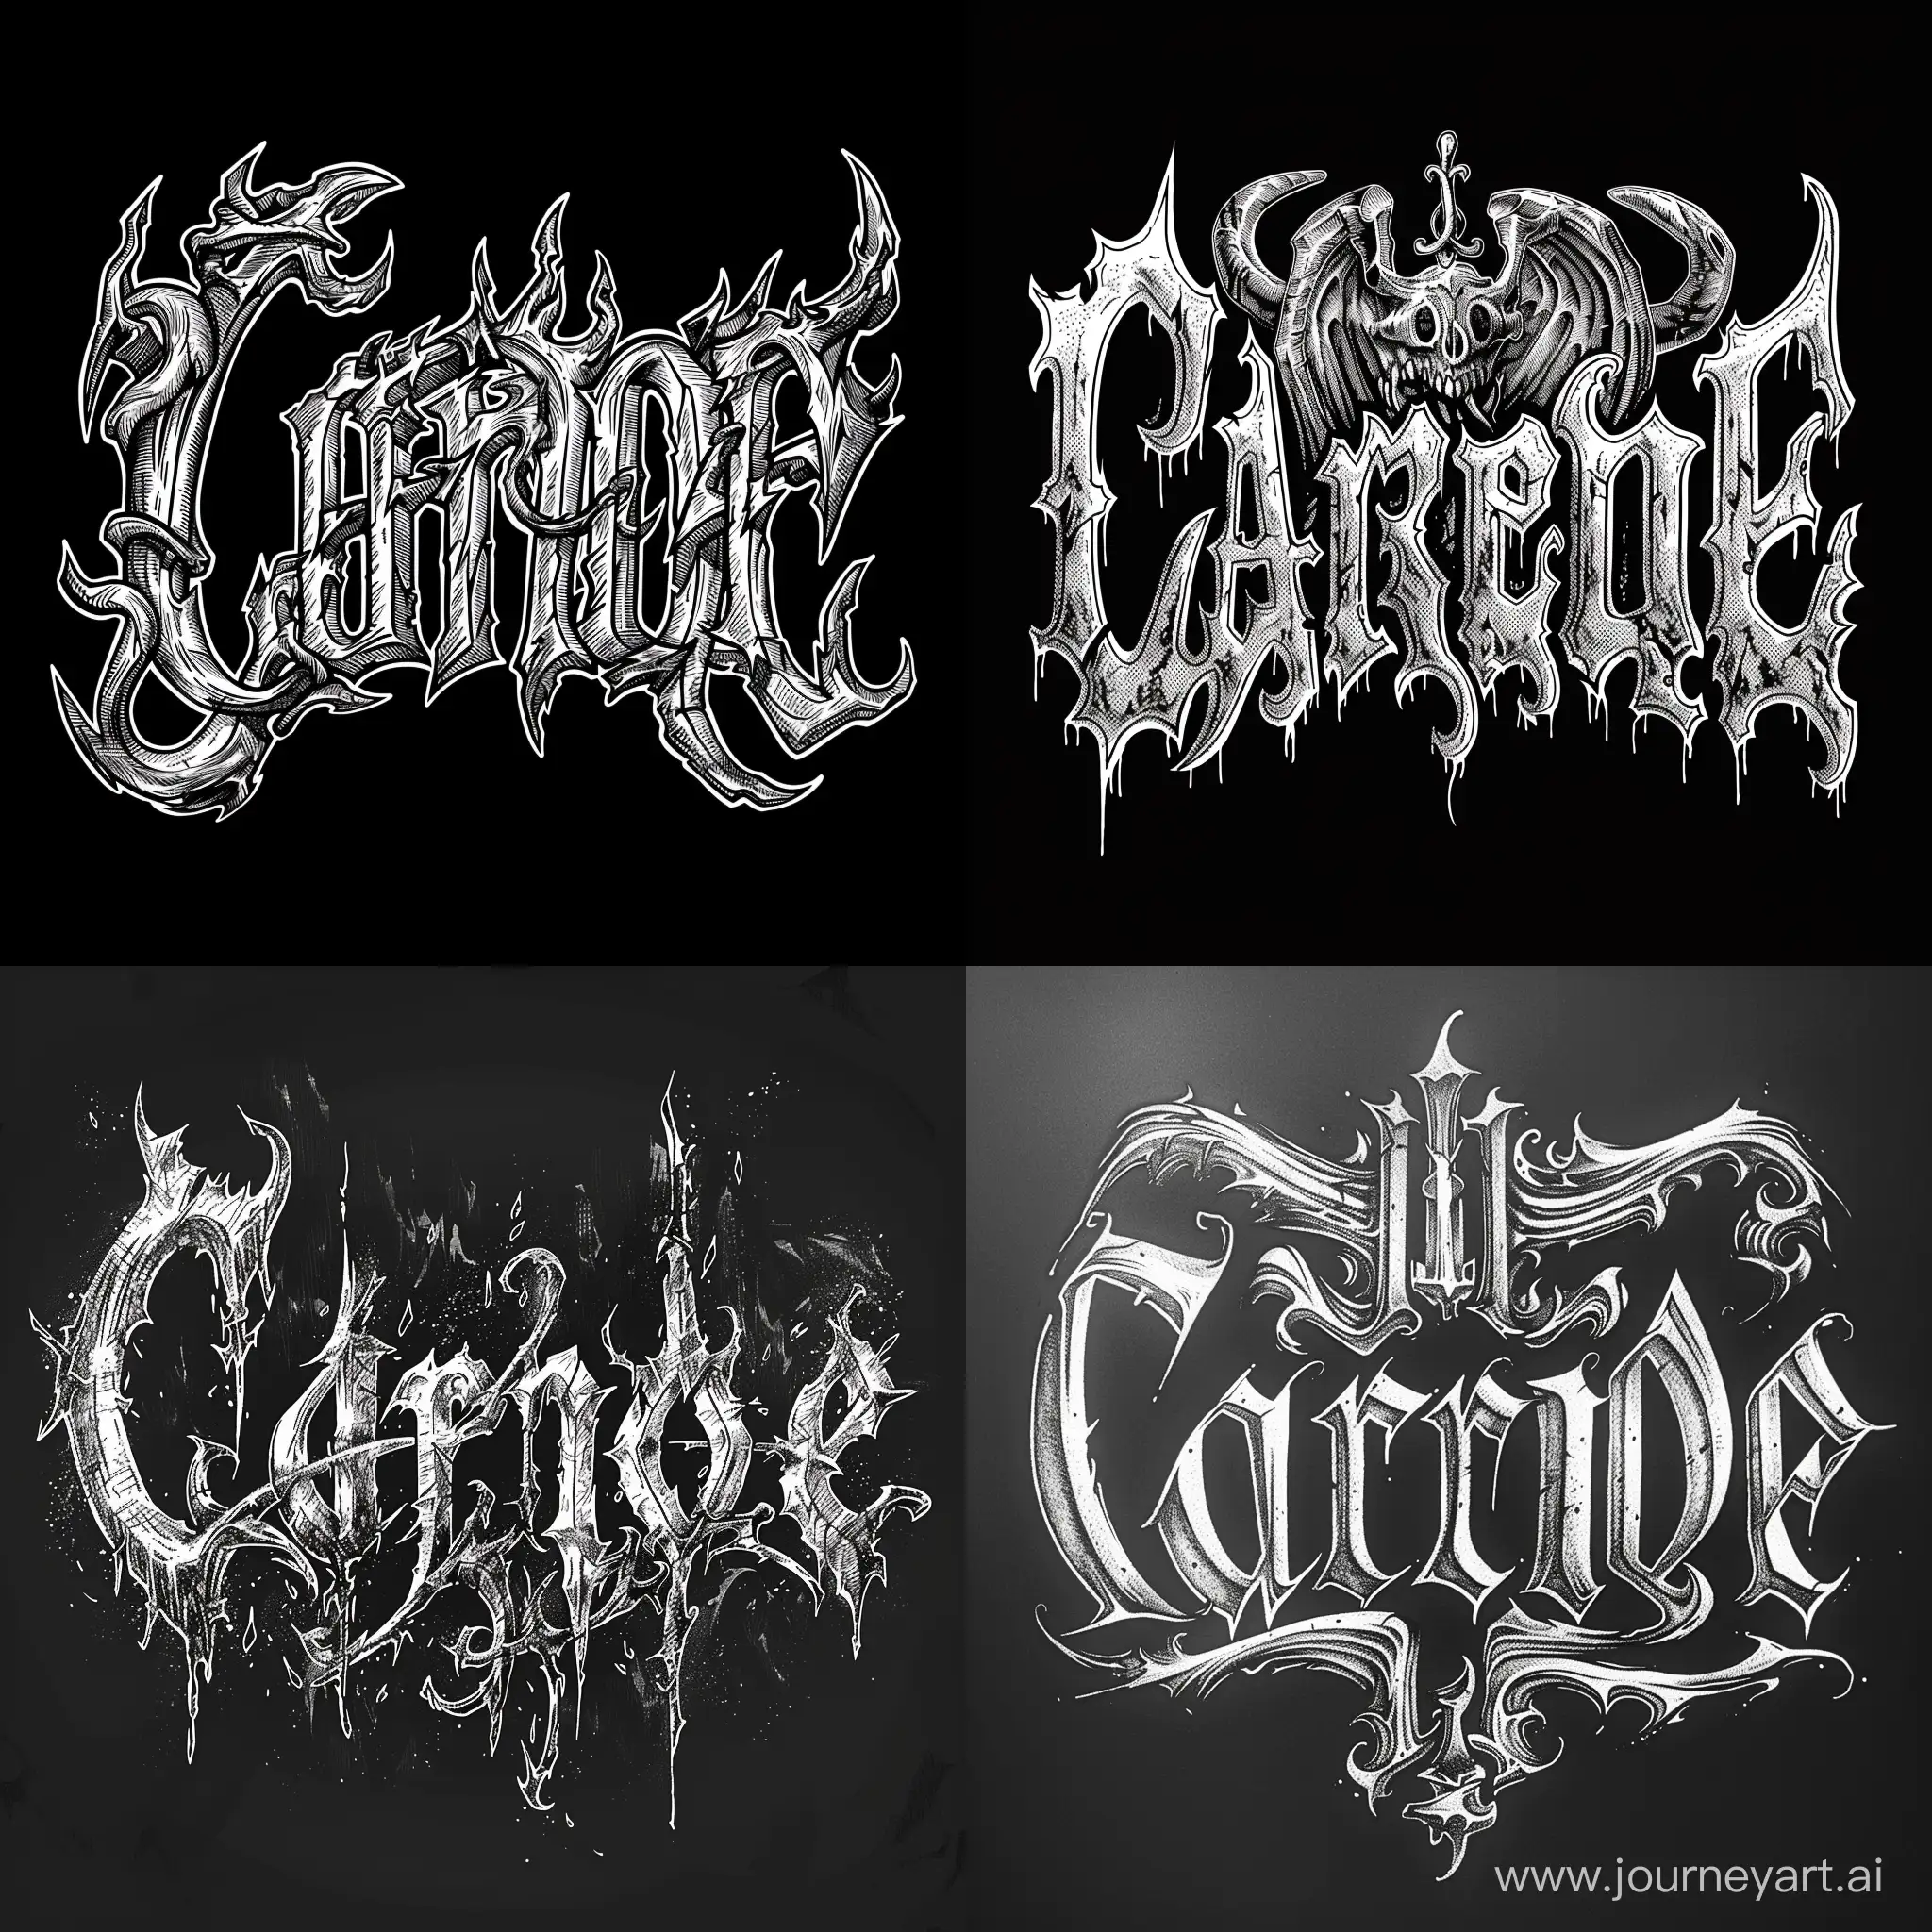 Bold-Black-Metal-Font-Spelling-Carne-in-Black-and-White-Style